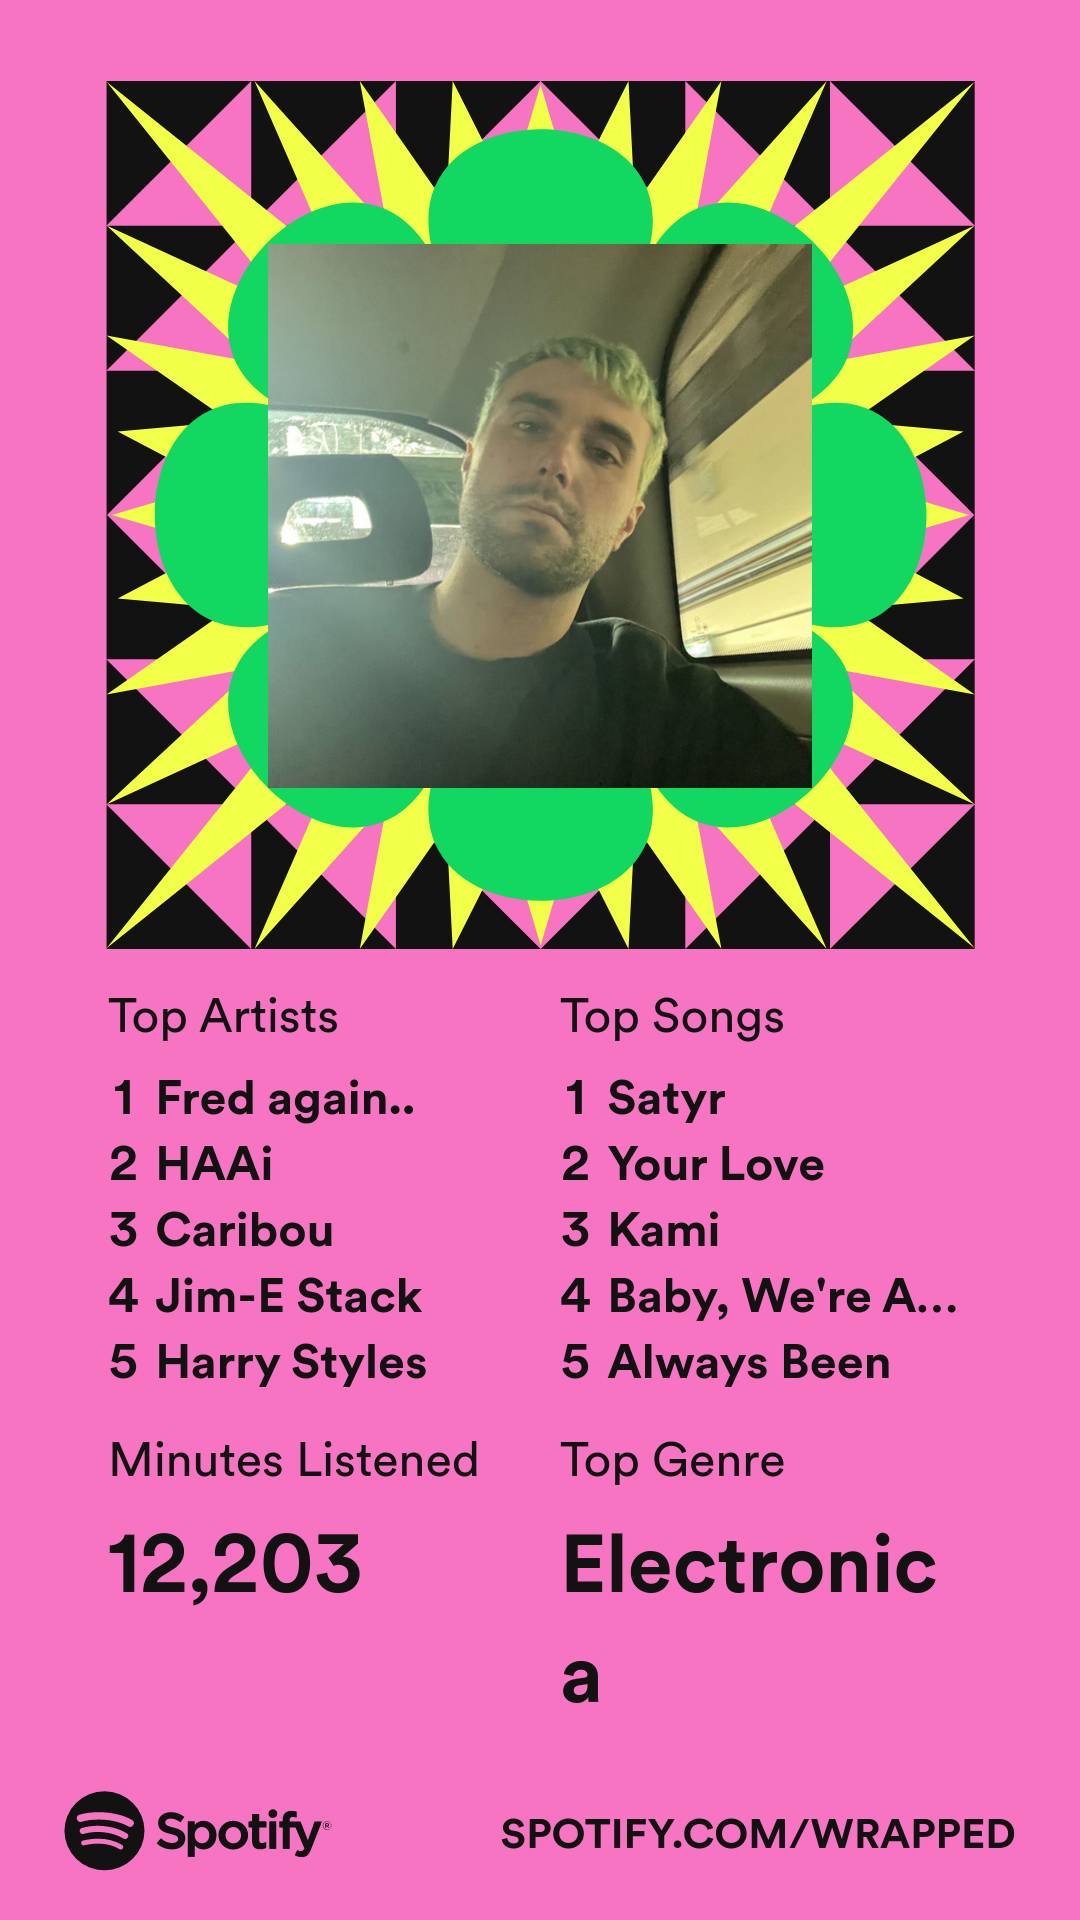 Spotify Wrapped summary page featuring my top 5 artists, top 5 songs, and of the year.